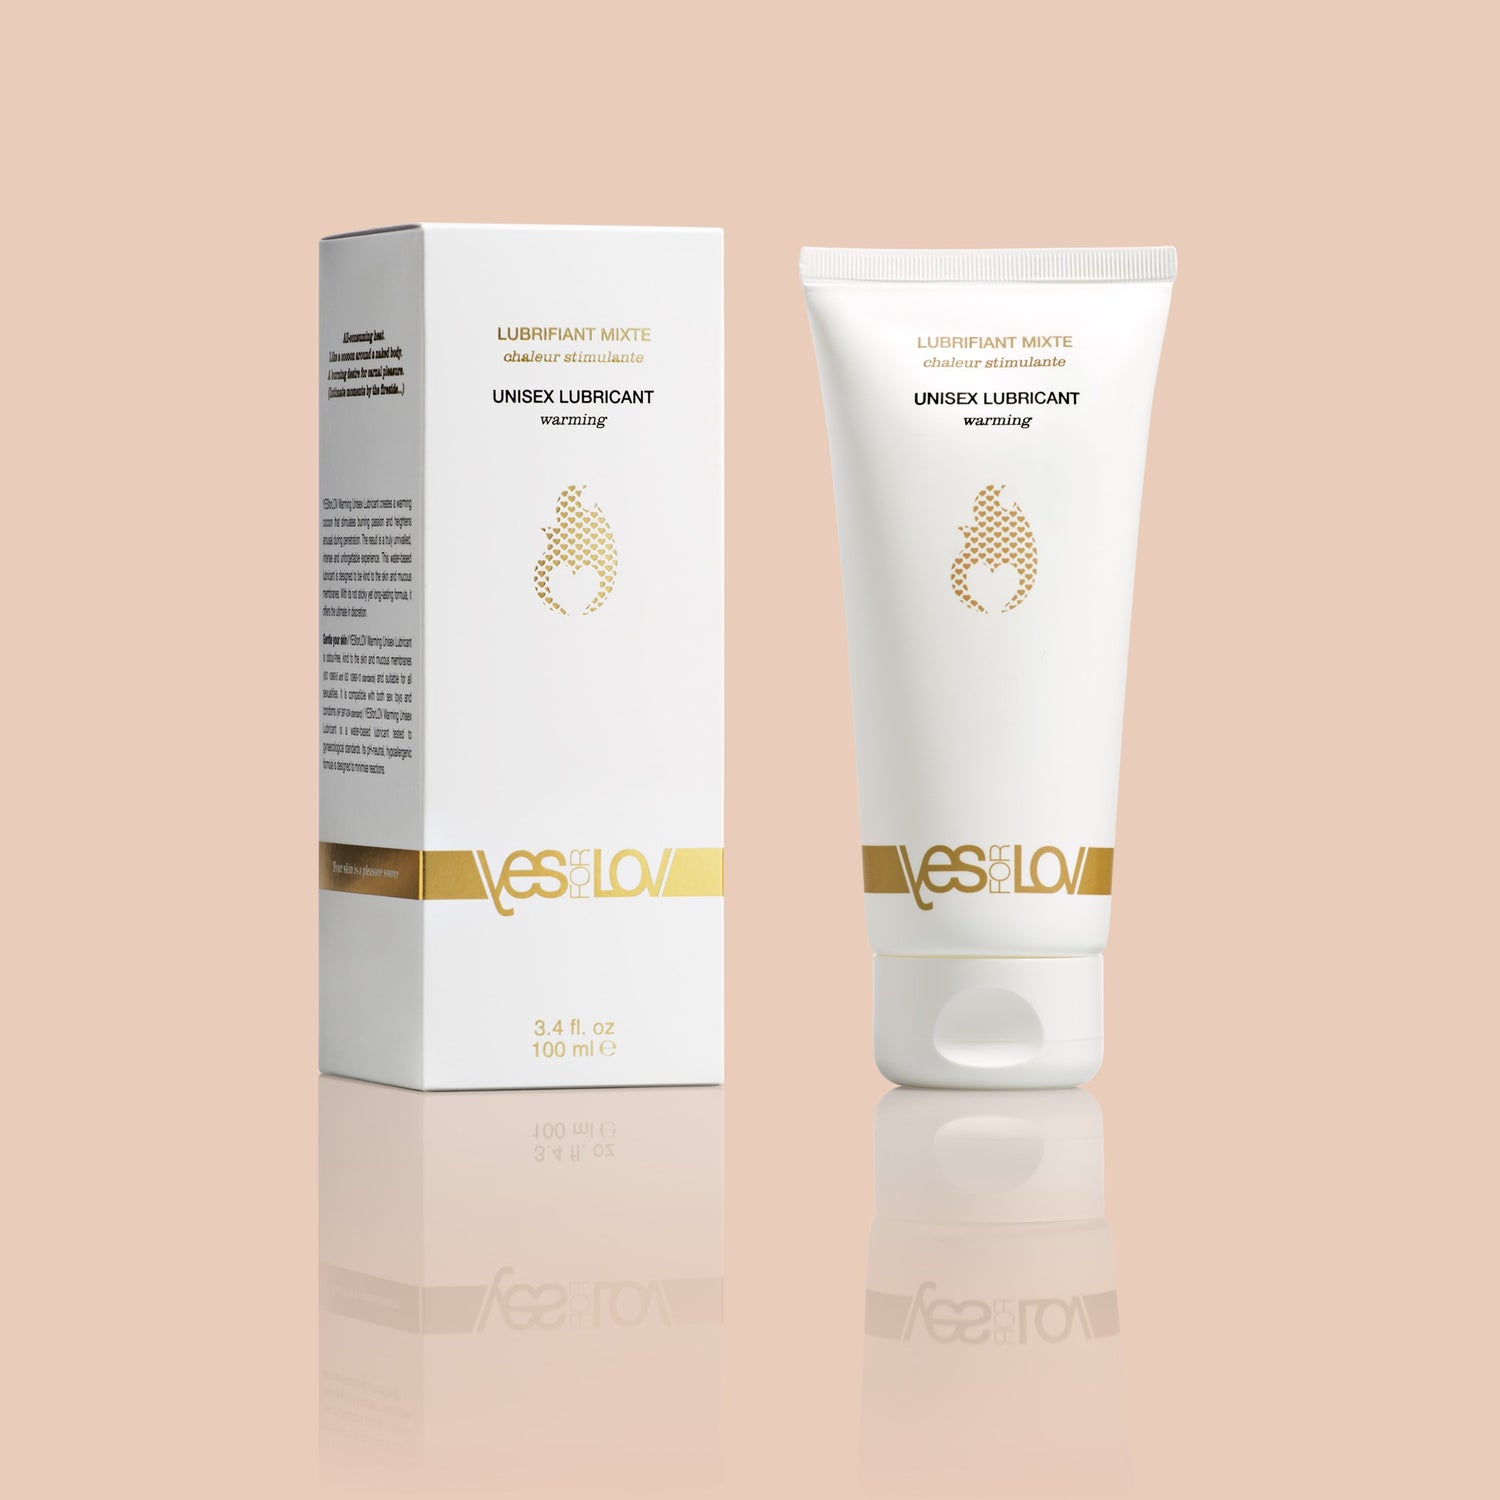 NATURAL INTIMATE LUBRICANT warming